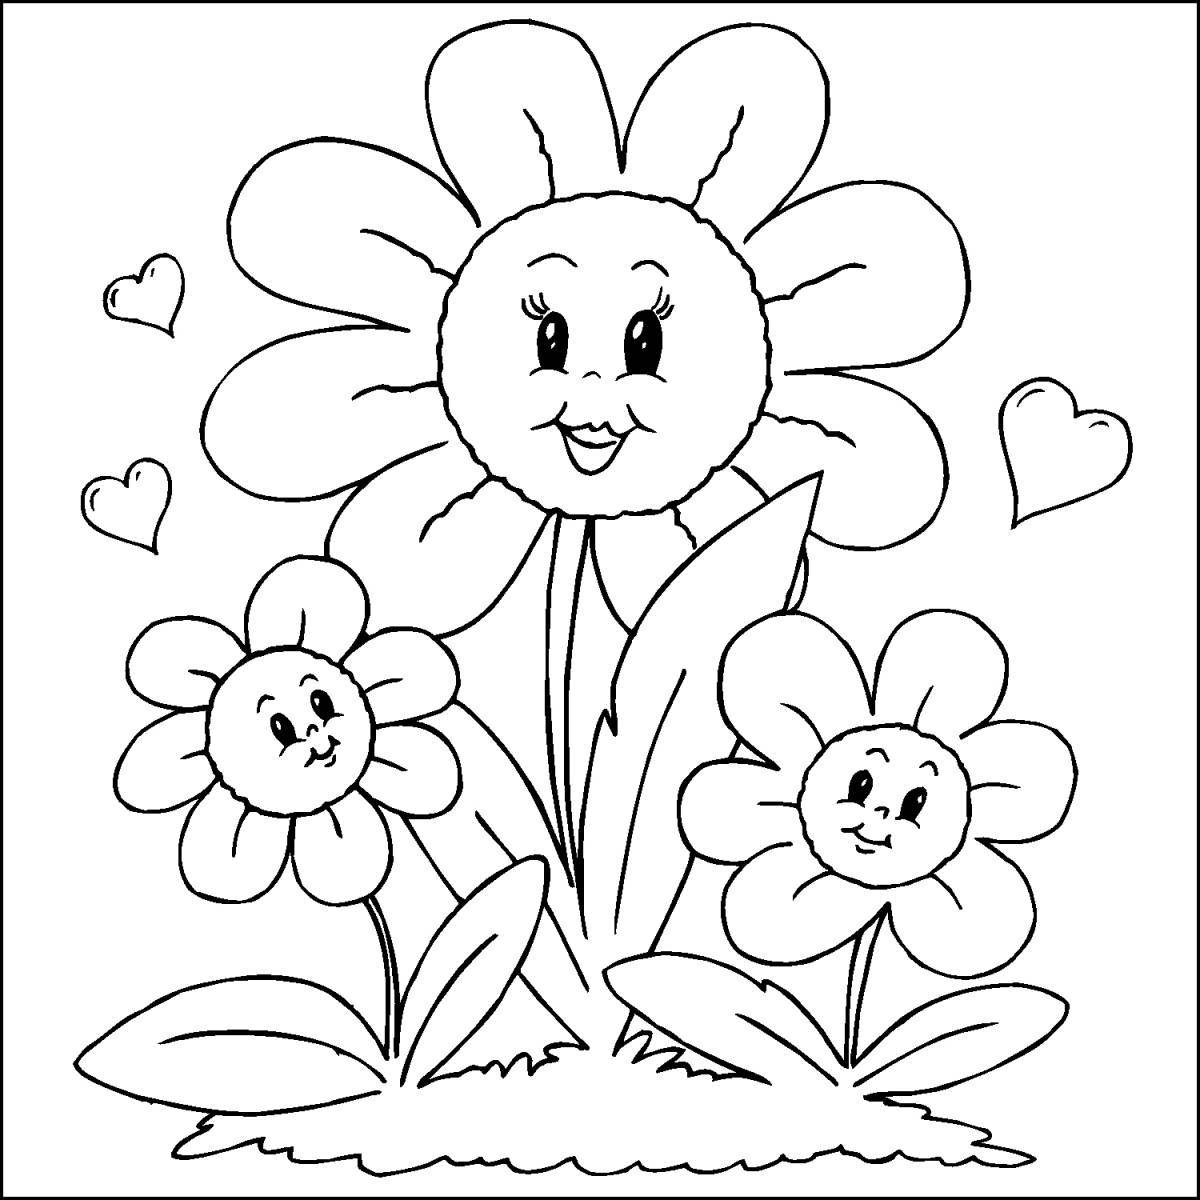 Radiant coloring flowers for children 4-5 years old